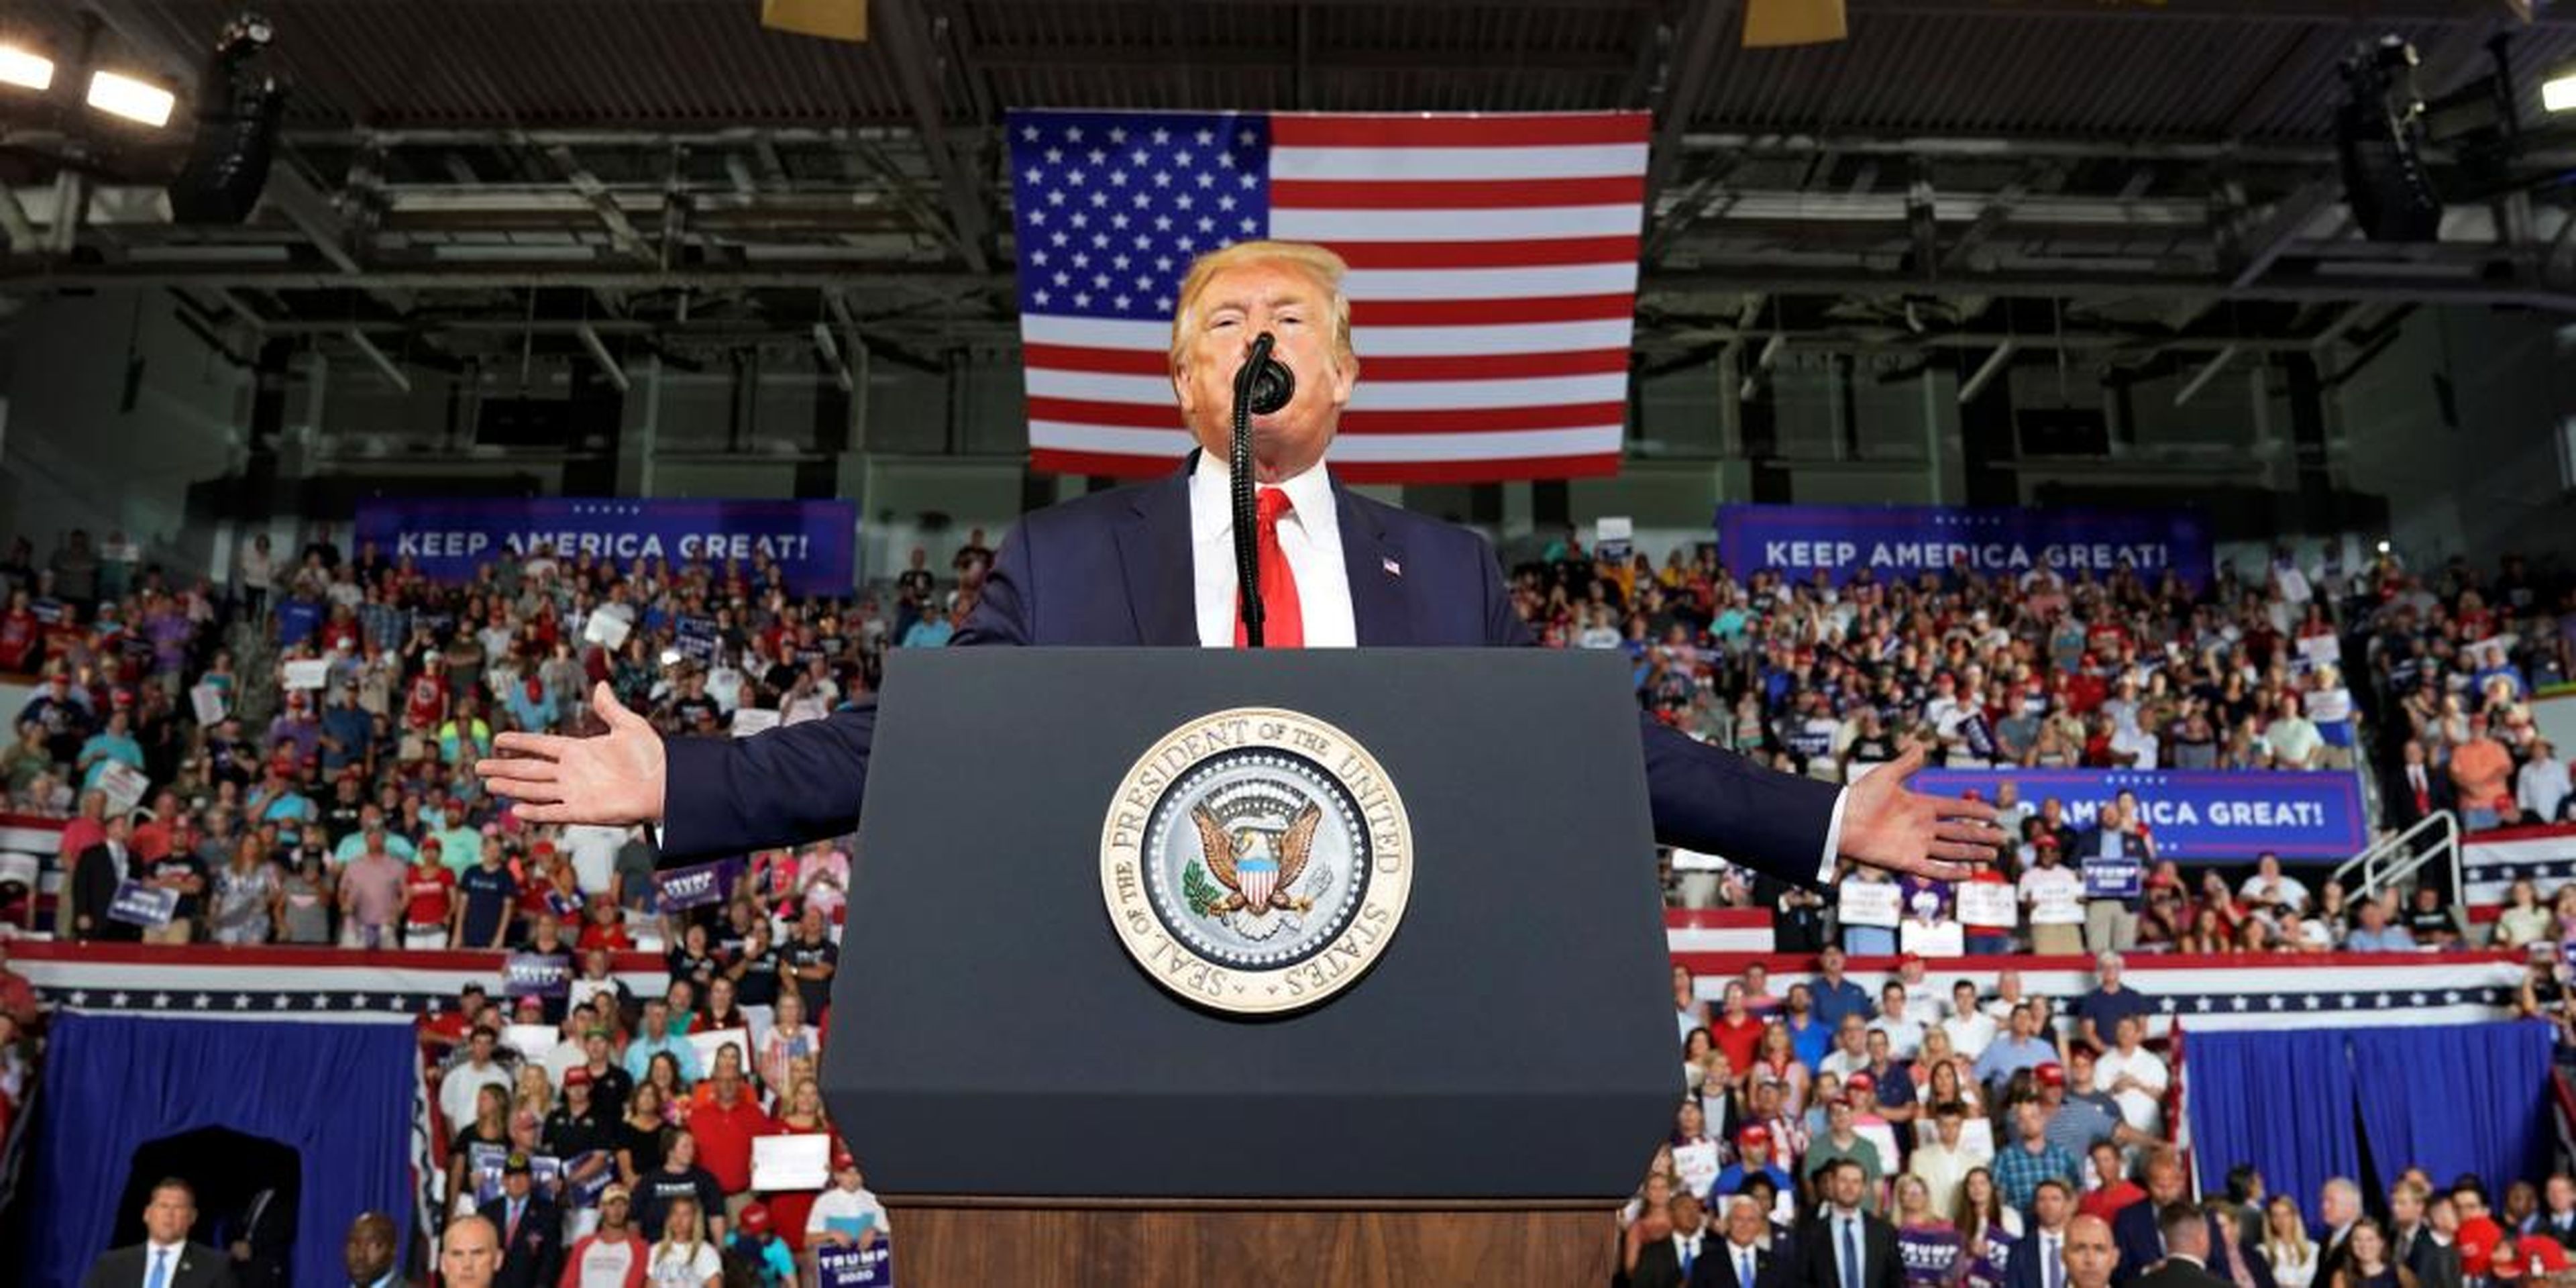 President Donald Trump speaks at a 2020 campaign rally in Greenville, North Carolina, on July 17, 2019.